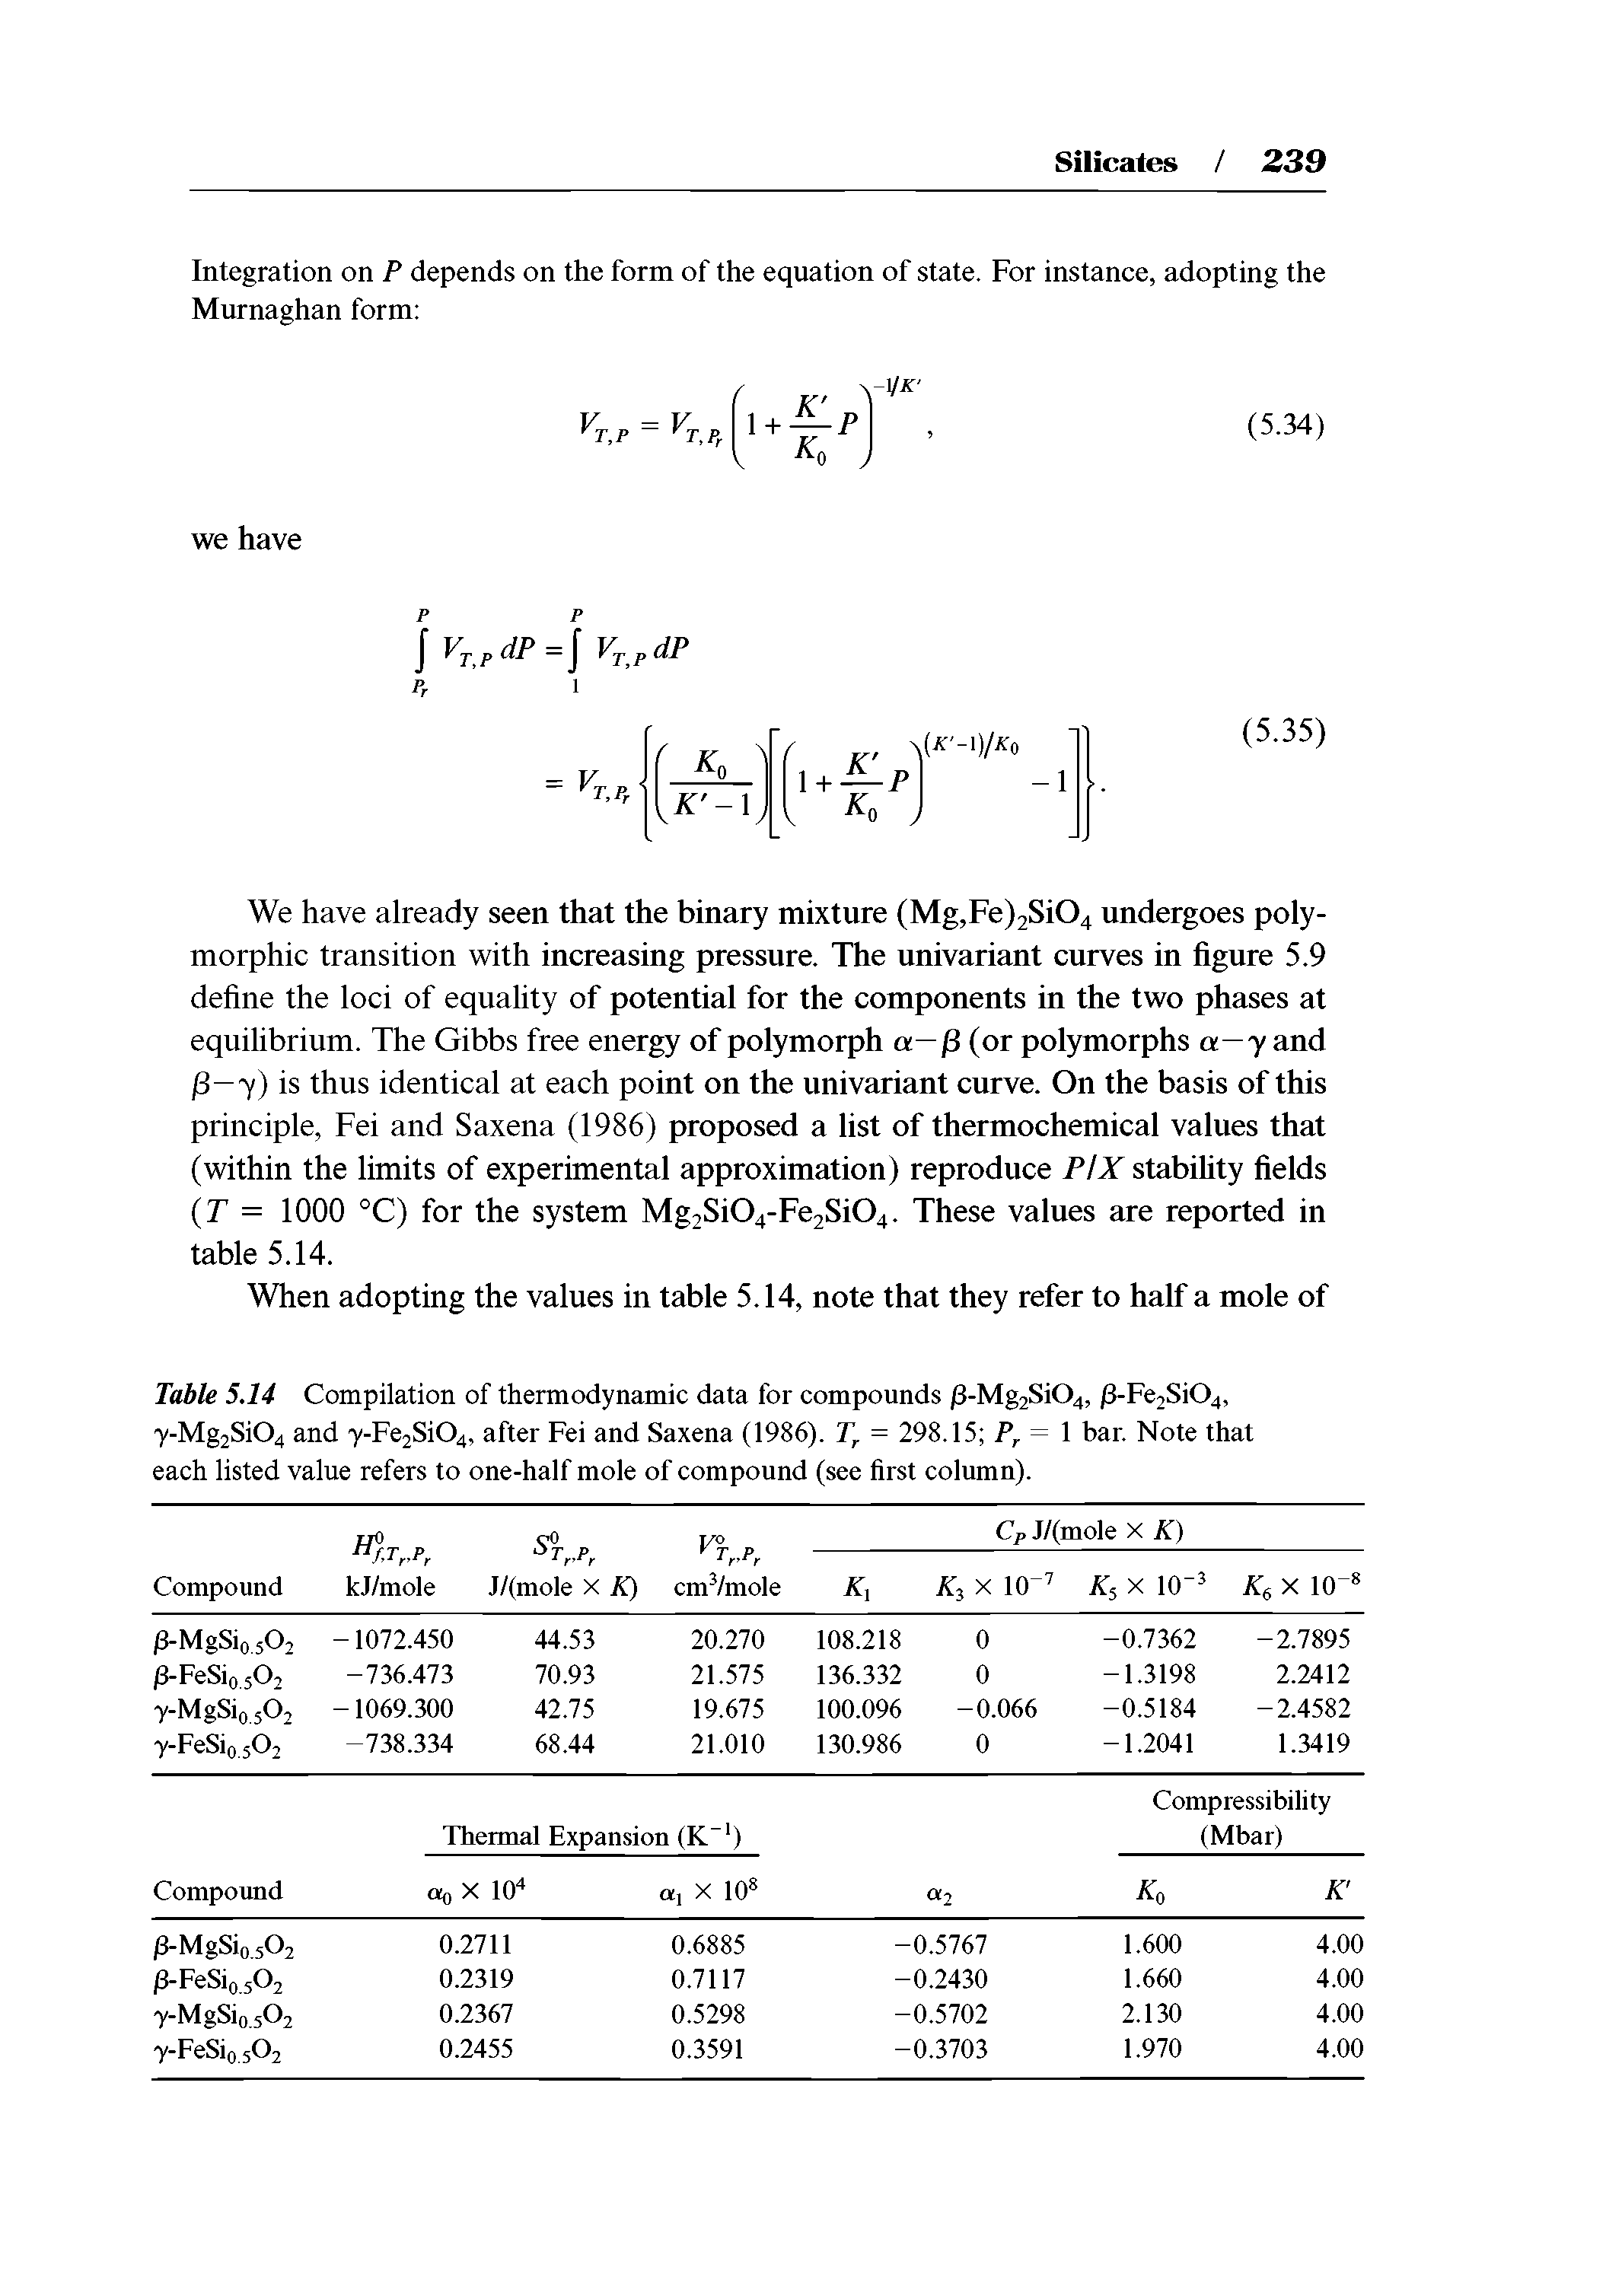 Table 5.14 Compilation of thermodynamic data for compounds /3-Mg2Si04, /3-Fe2Si04, y-Mg2Si04 and y-Fe2Si04, after Fei and Saxena (1986). T = 298.15 /, .= bar. Note that each listed value refers to one-half mole of compound (see first column).